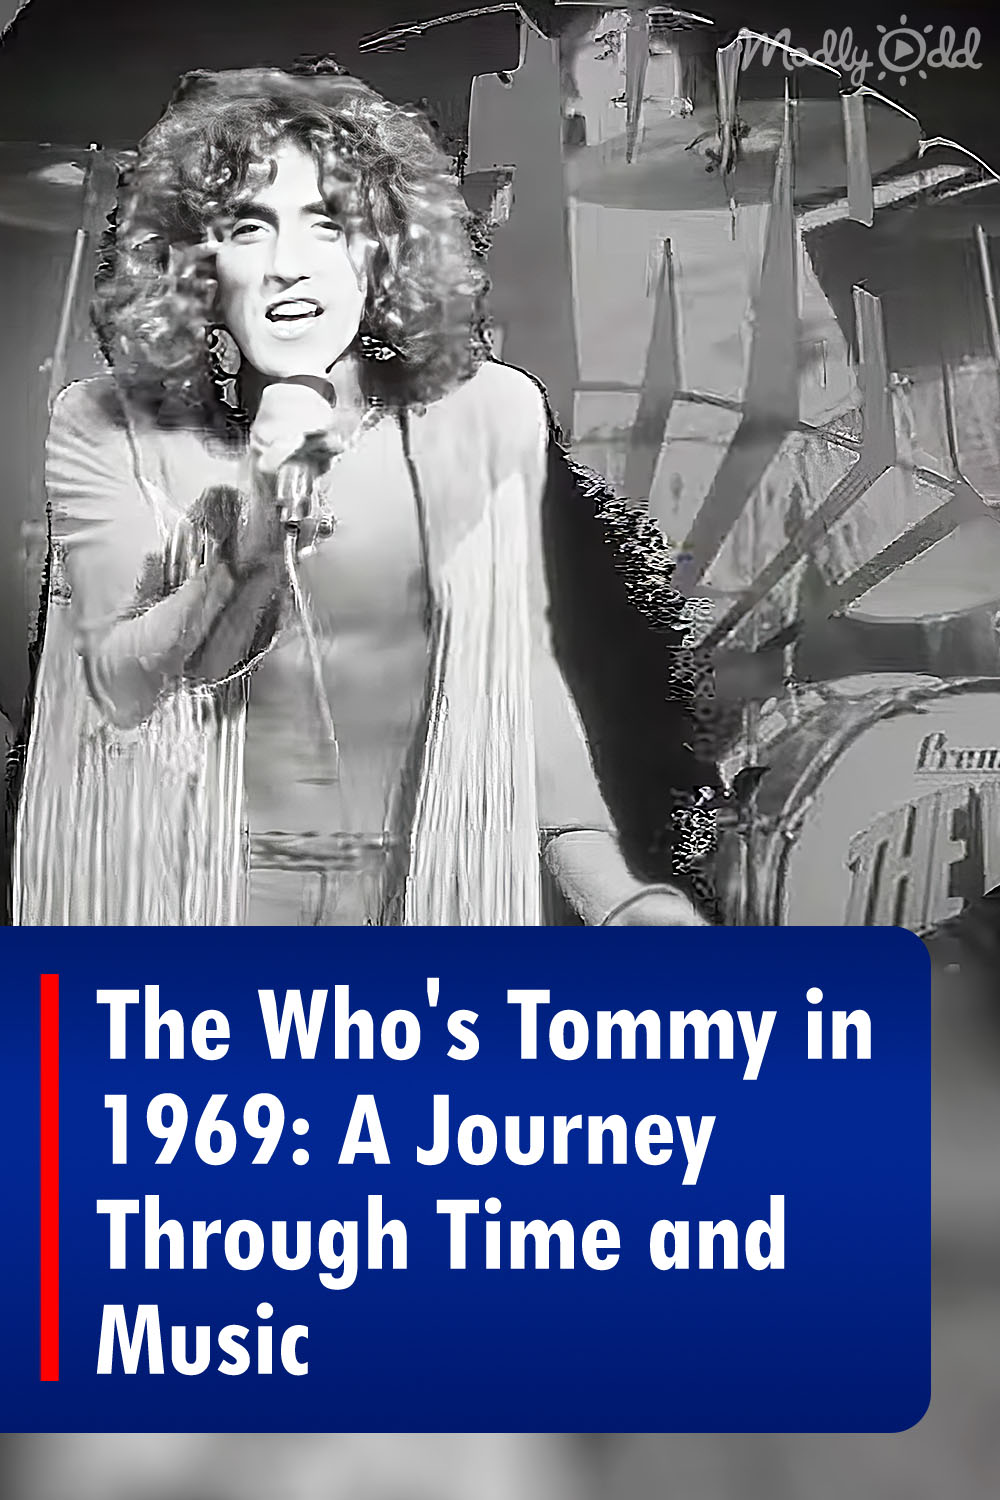 Relive 1969 with The Who and Their Iconic Album Tommy